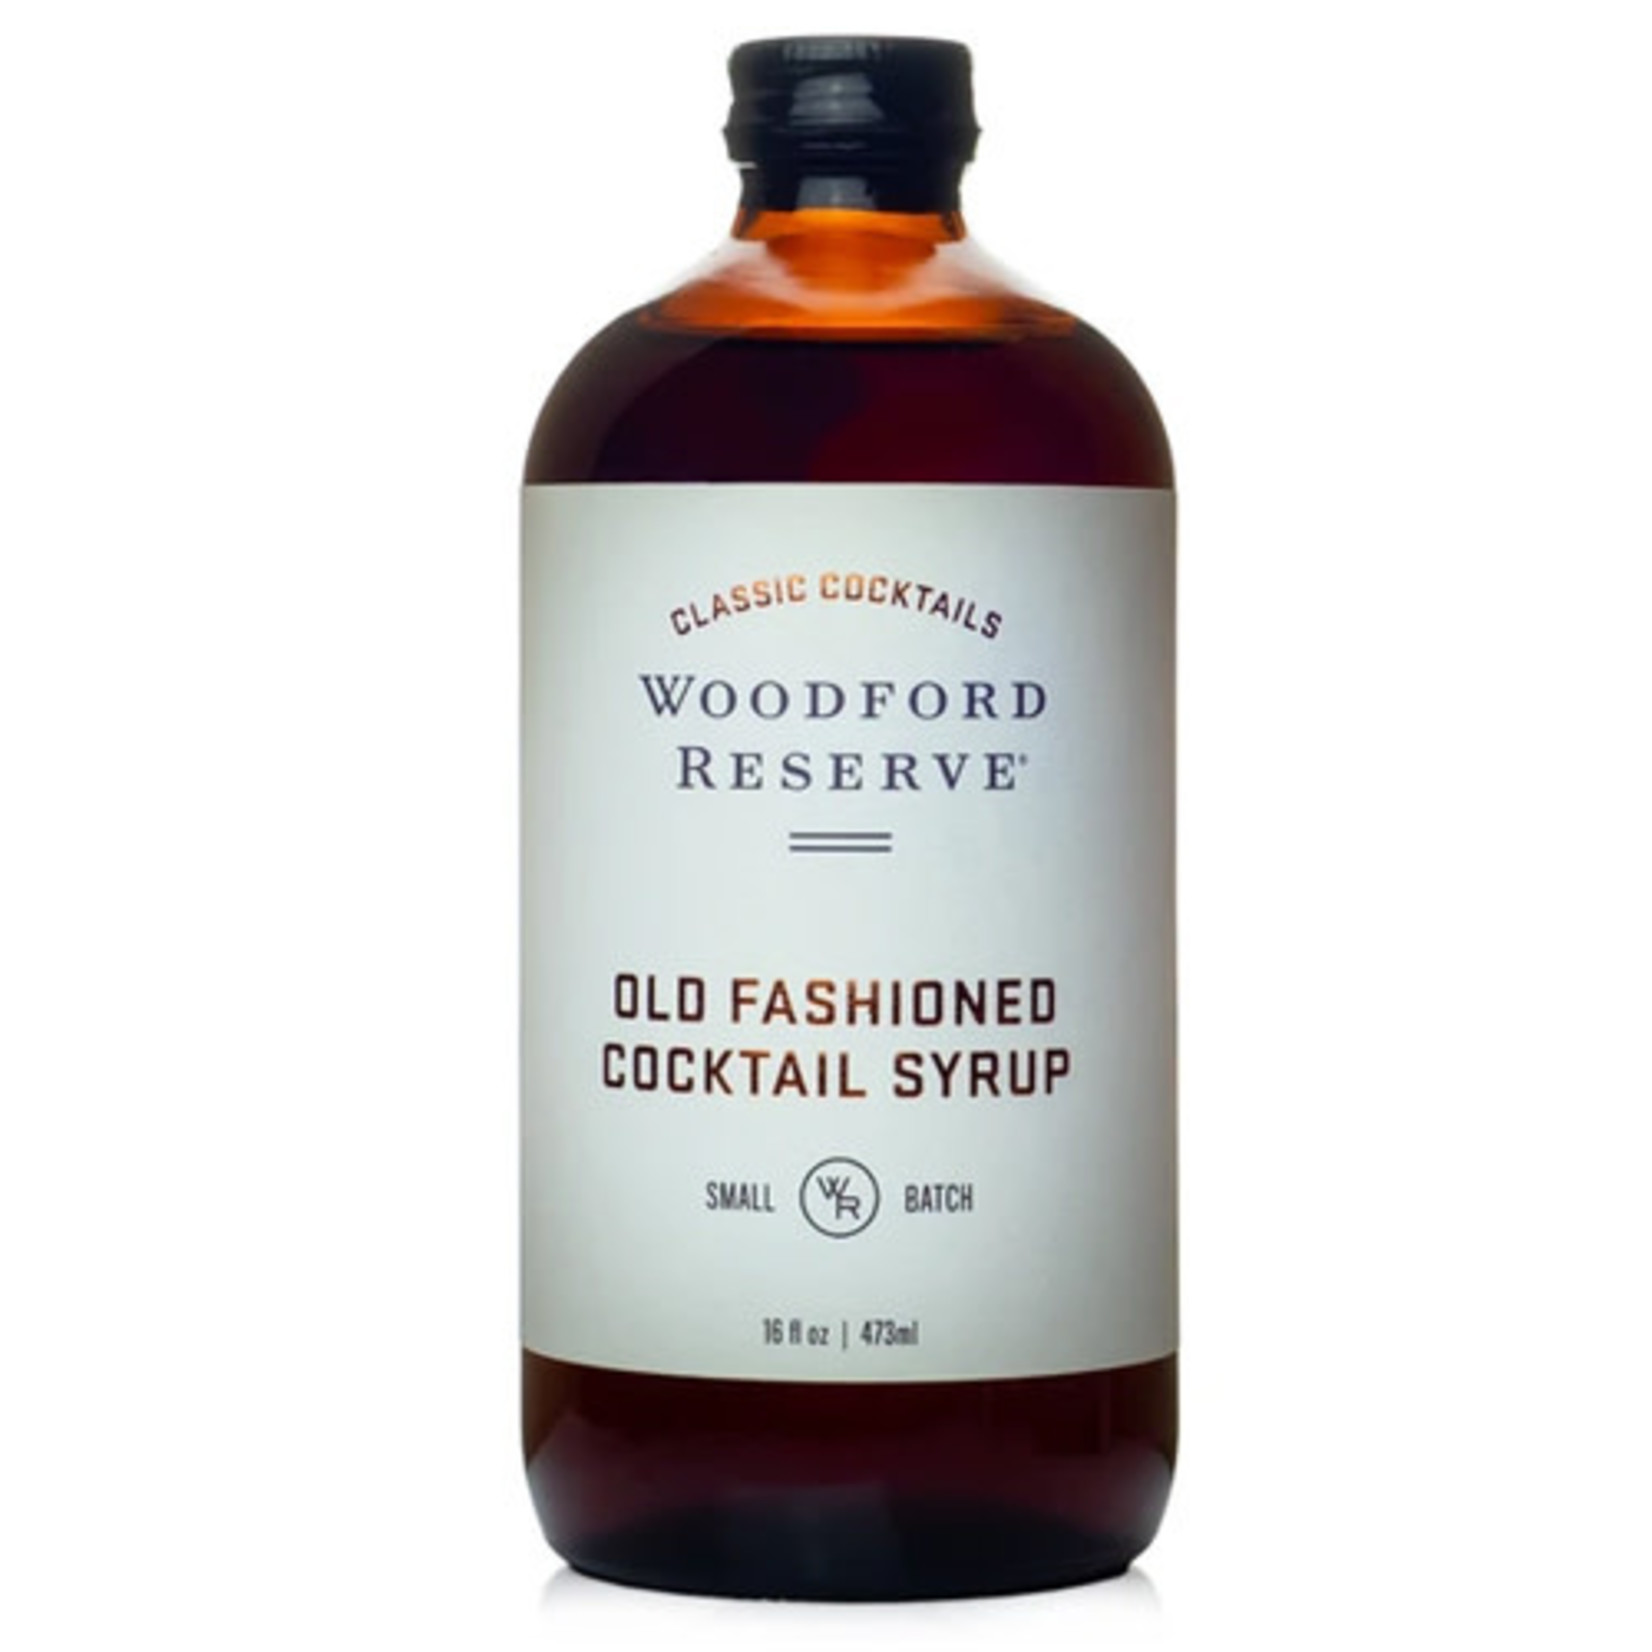 Woodford Reserve Woodford Reserve Old Fashioned Cocktail Syrup 16 oz